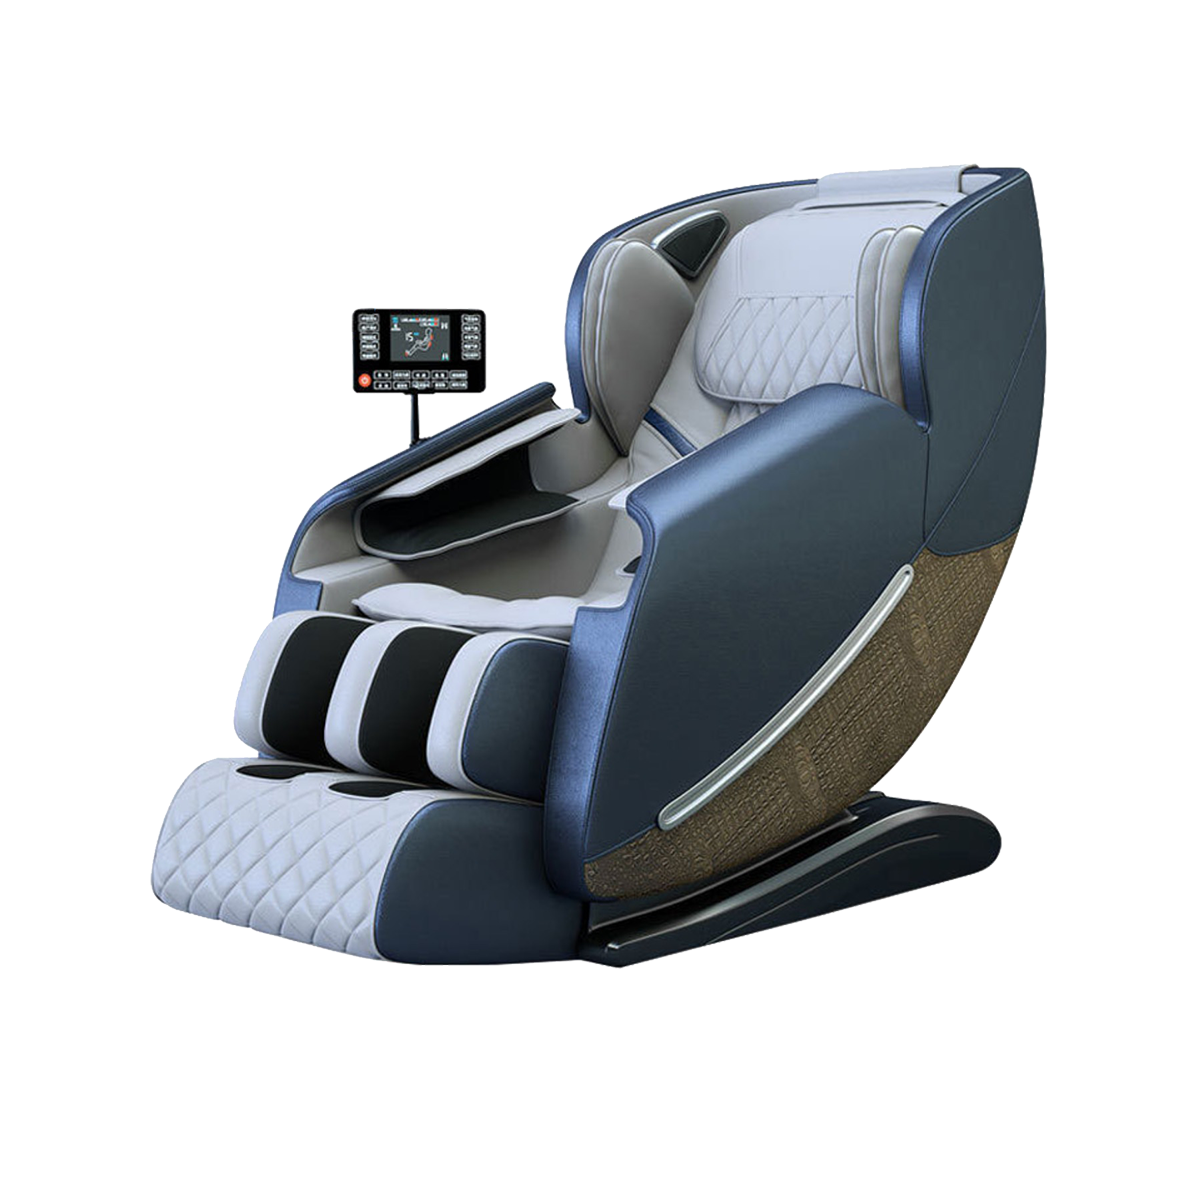 Healthy Electric Intelligent Luxury Zero Gravity Massage Chair Full Body Al Multifunctional Armchair SL Track Featured Image